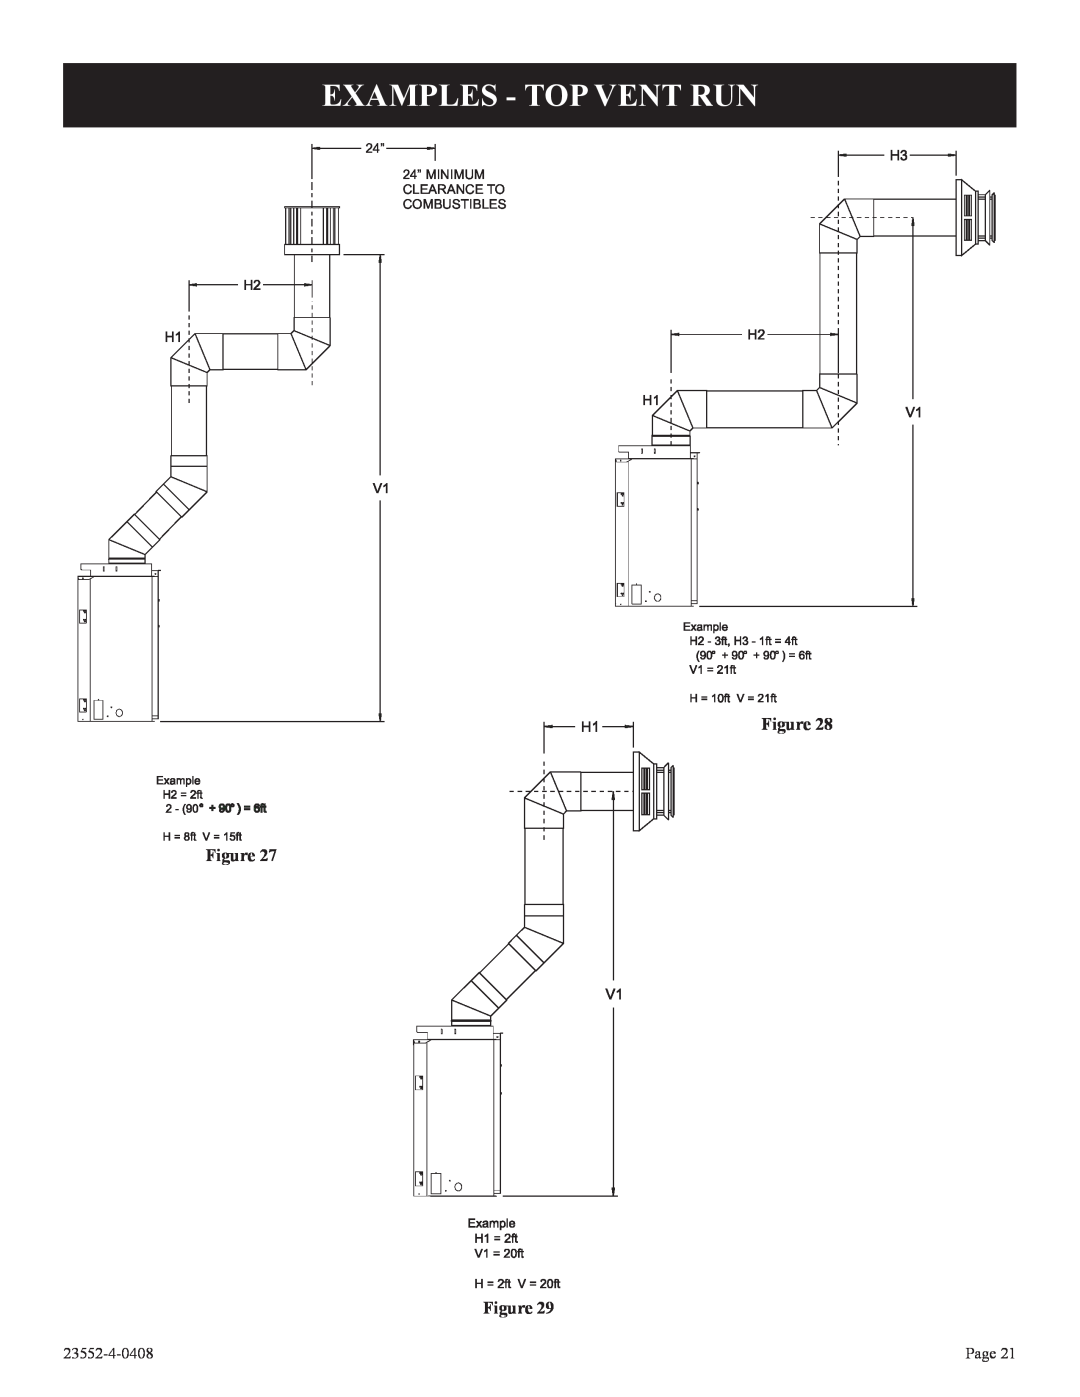 Empire Comfort Systems 1, DVD32FP3, 3)(N Examples - Top Vent Run, Figure Figure Figure, 23552-4-0408, Page 